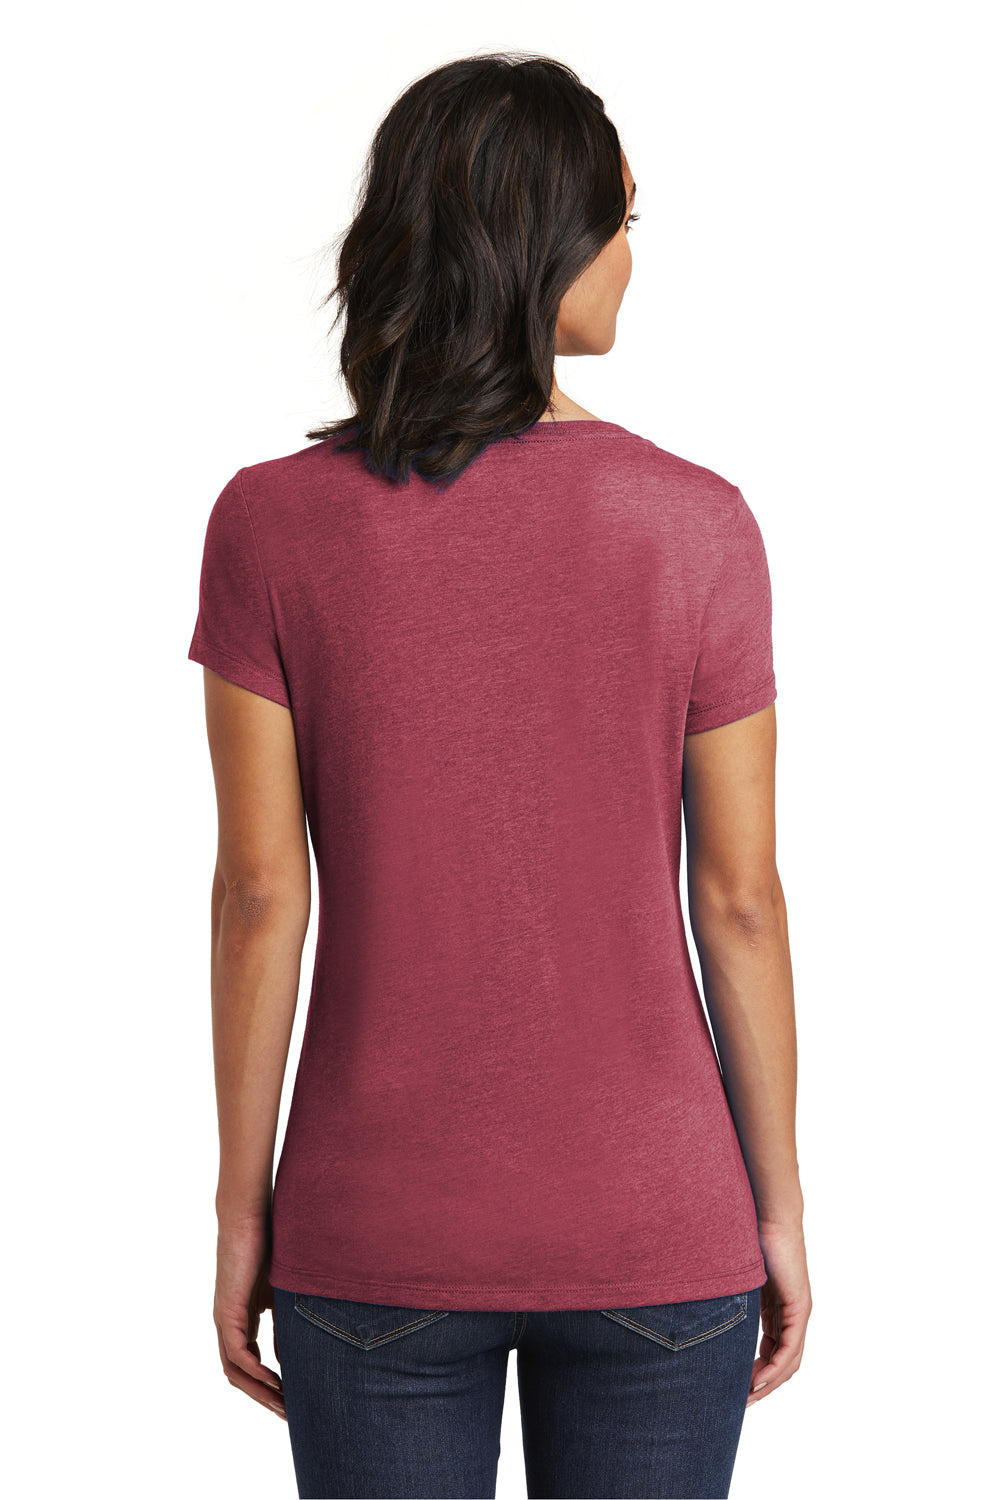 District DT6503 Womens Very Important Short Sleeve V-Neck T-Shirt Heather Cardinal Red Back